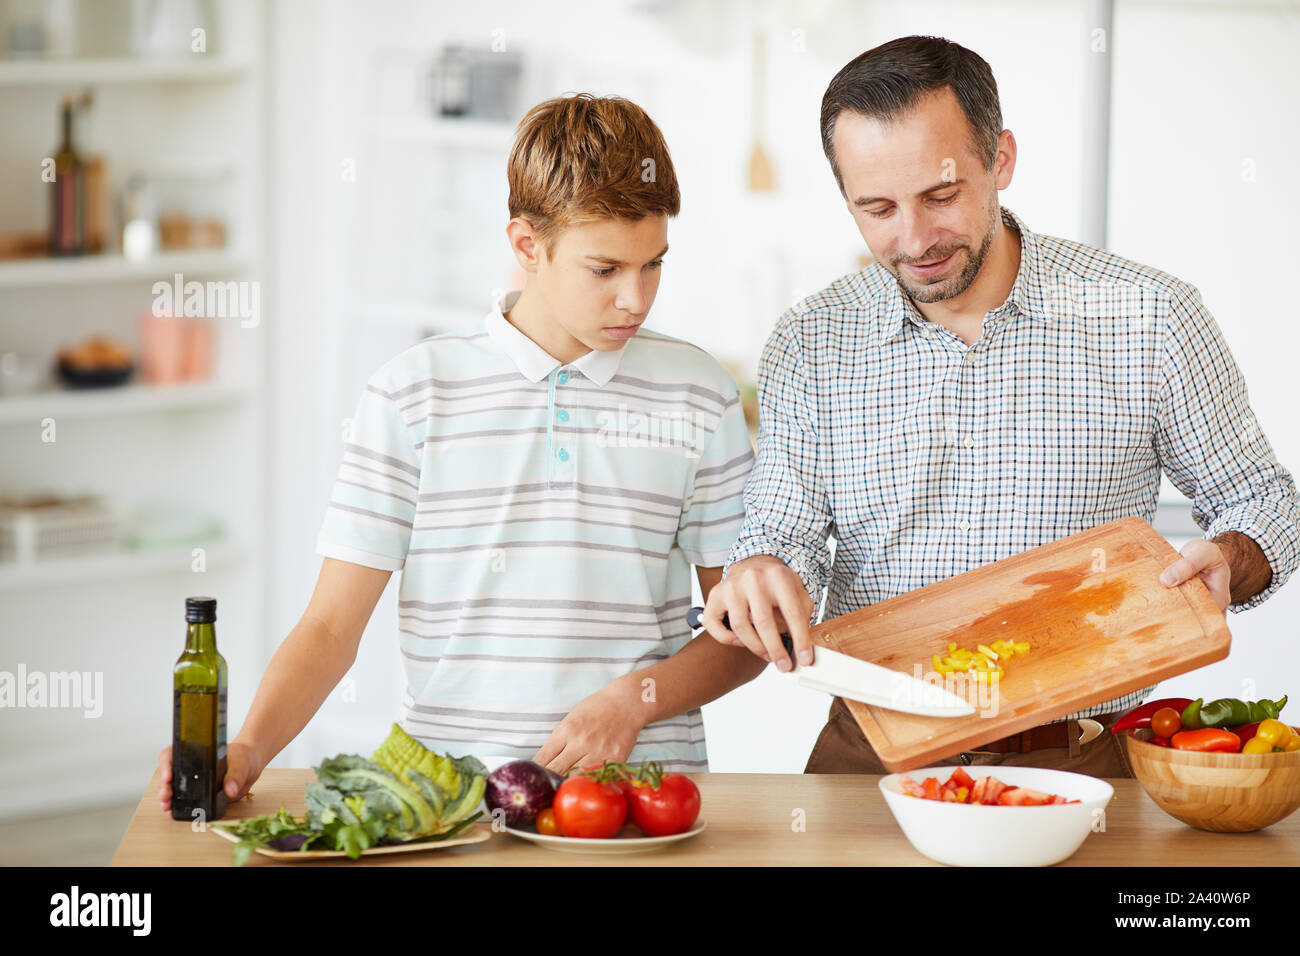 Young father cooking vegetable salad and teaching his son to cook in domestic kitchen Stock Photo